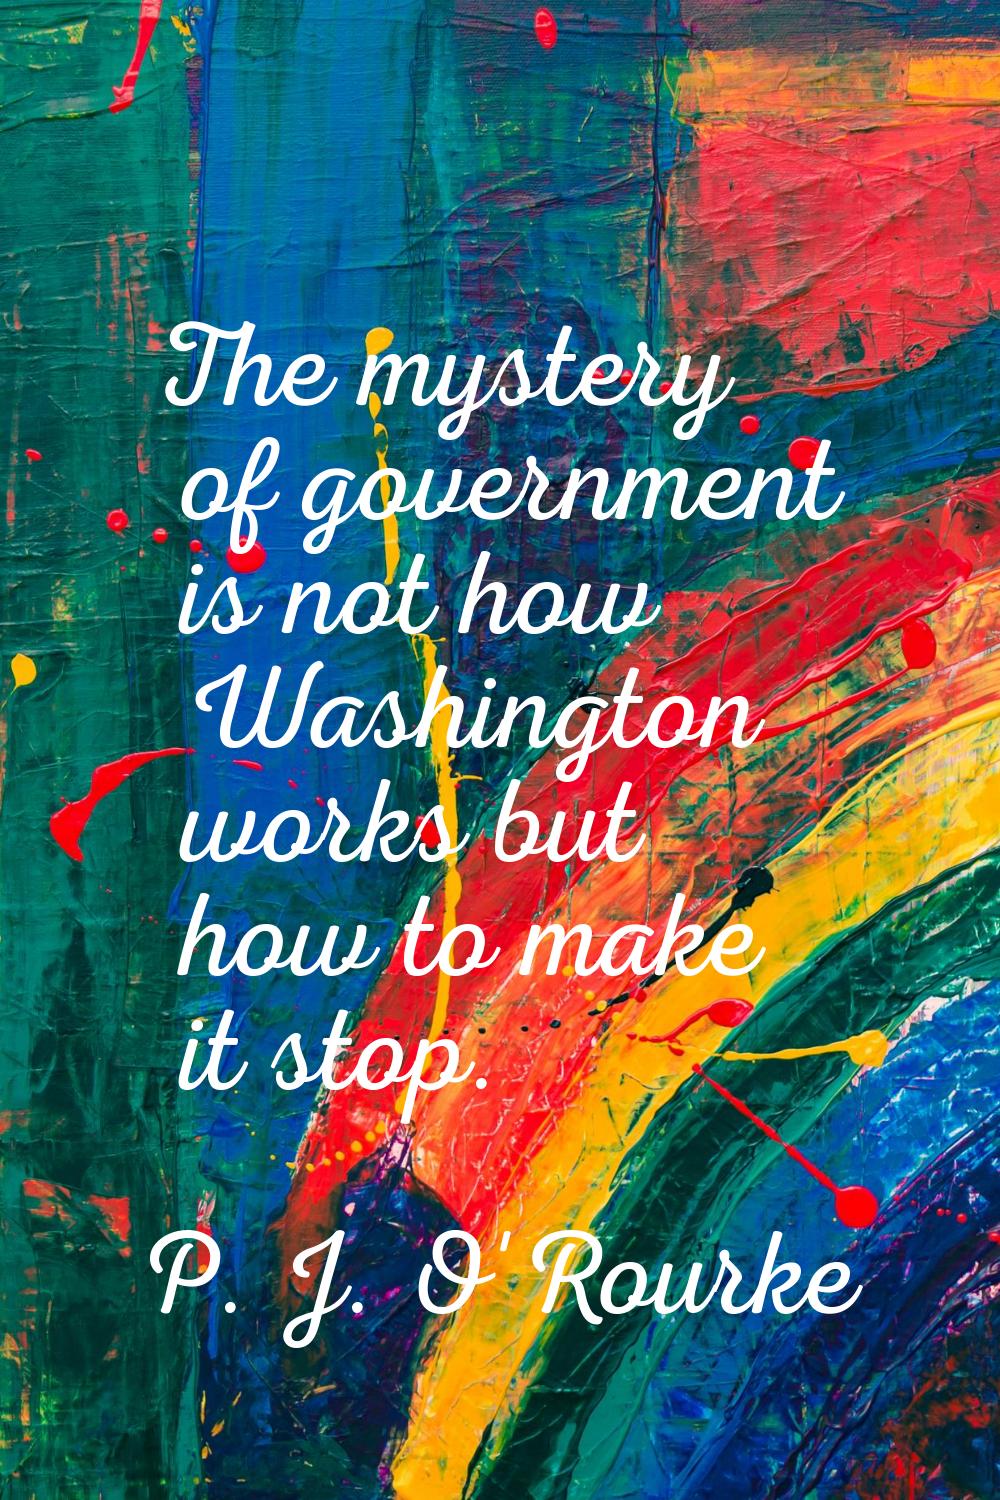 The mystery of government is not how Washington works but how to make it stop.